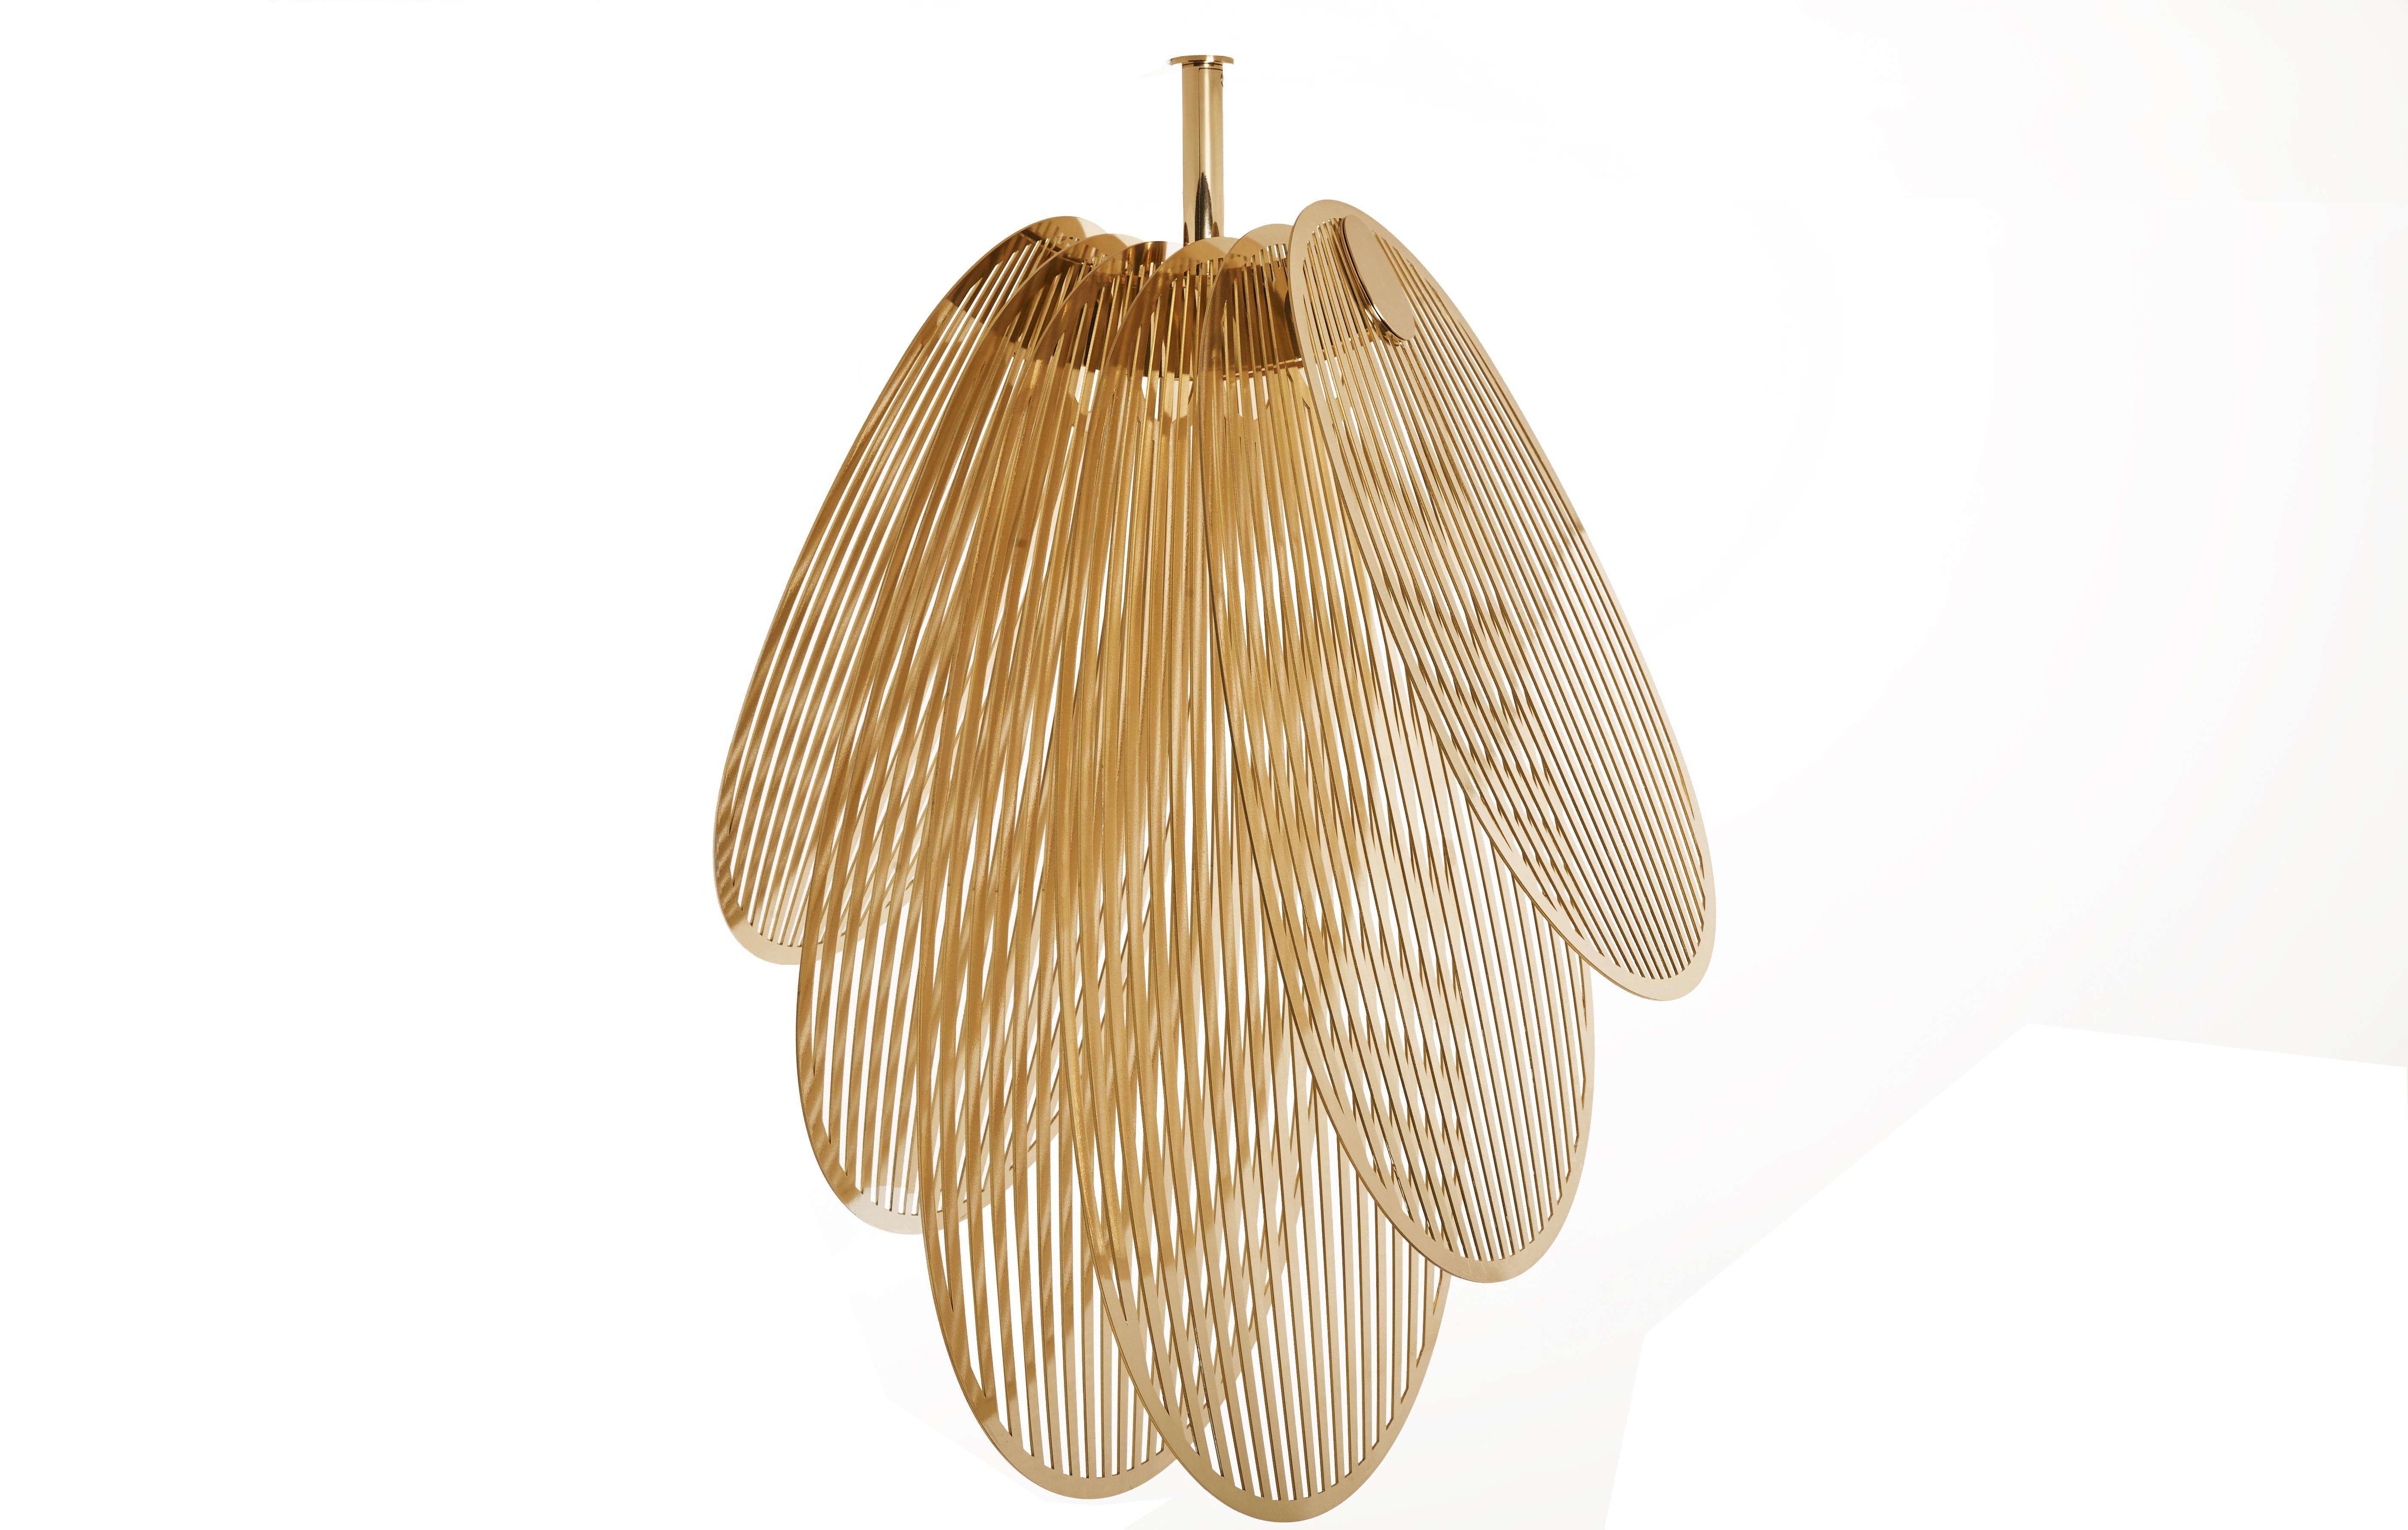 Orchidée Ajourée pendant light by Mydriaz
Dimensions: W 40.5 x H 61.2 x D 47.5 cm
Materials: Brass
Finishes: Golden-plated polished brass, white nickel finish on polished brass, Black nickel finish on polished brass
13 kg

Light source: 12V to